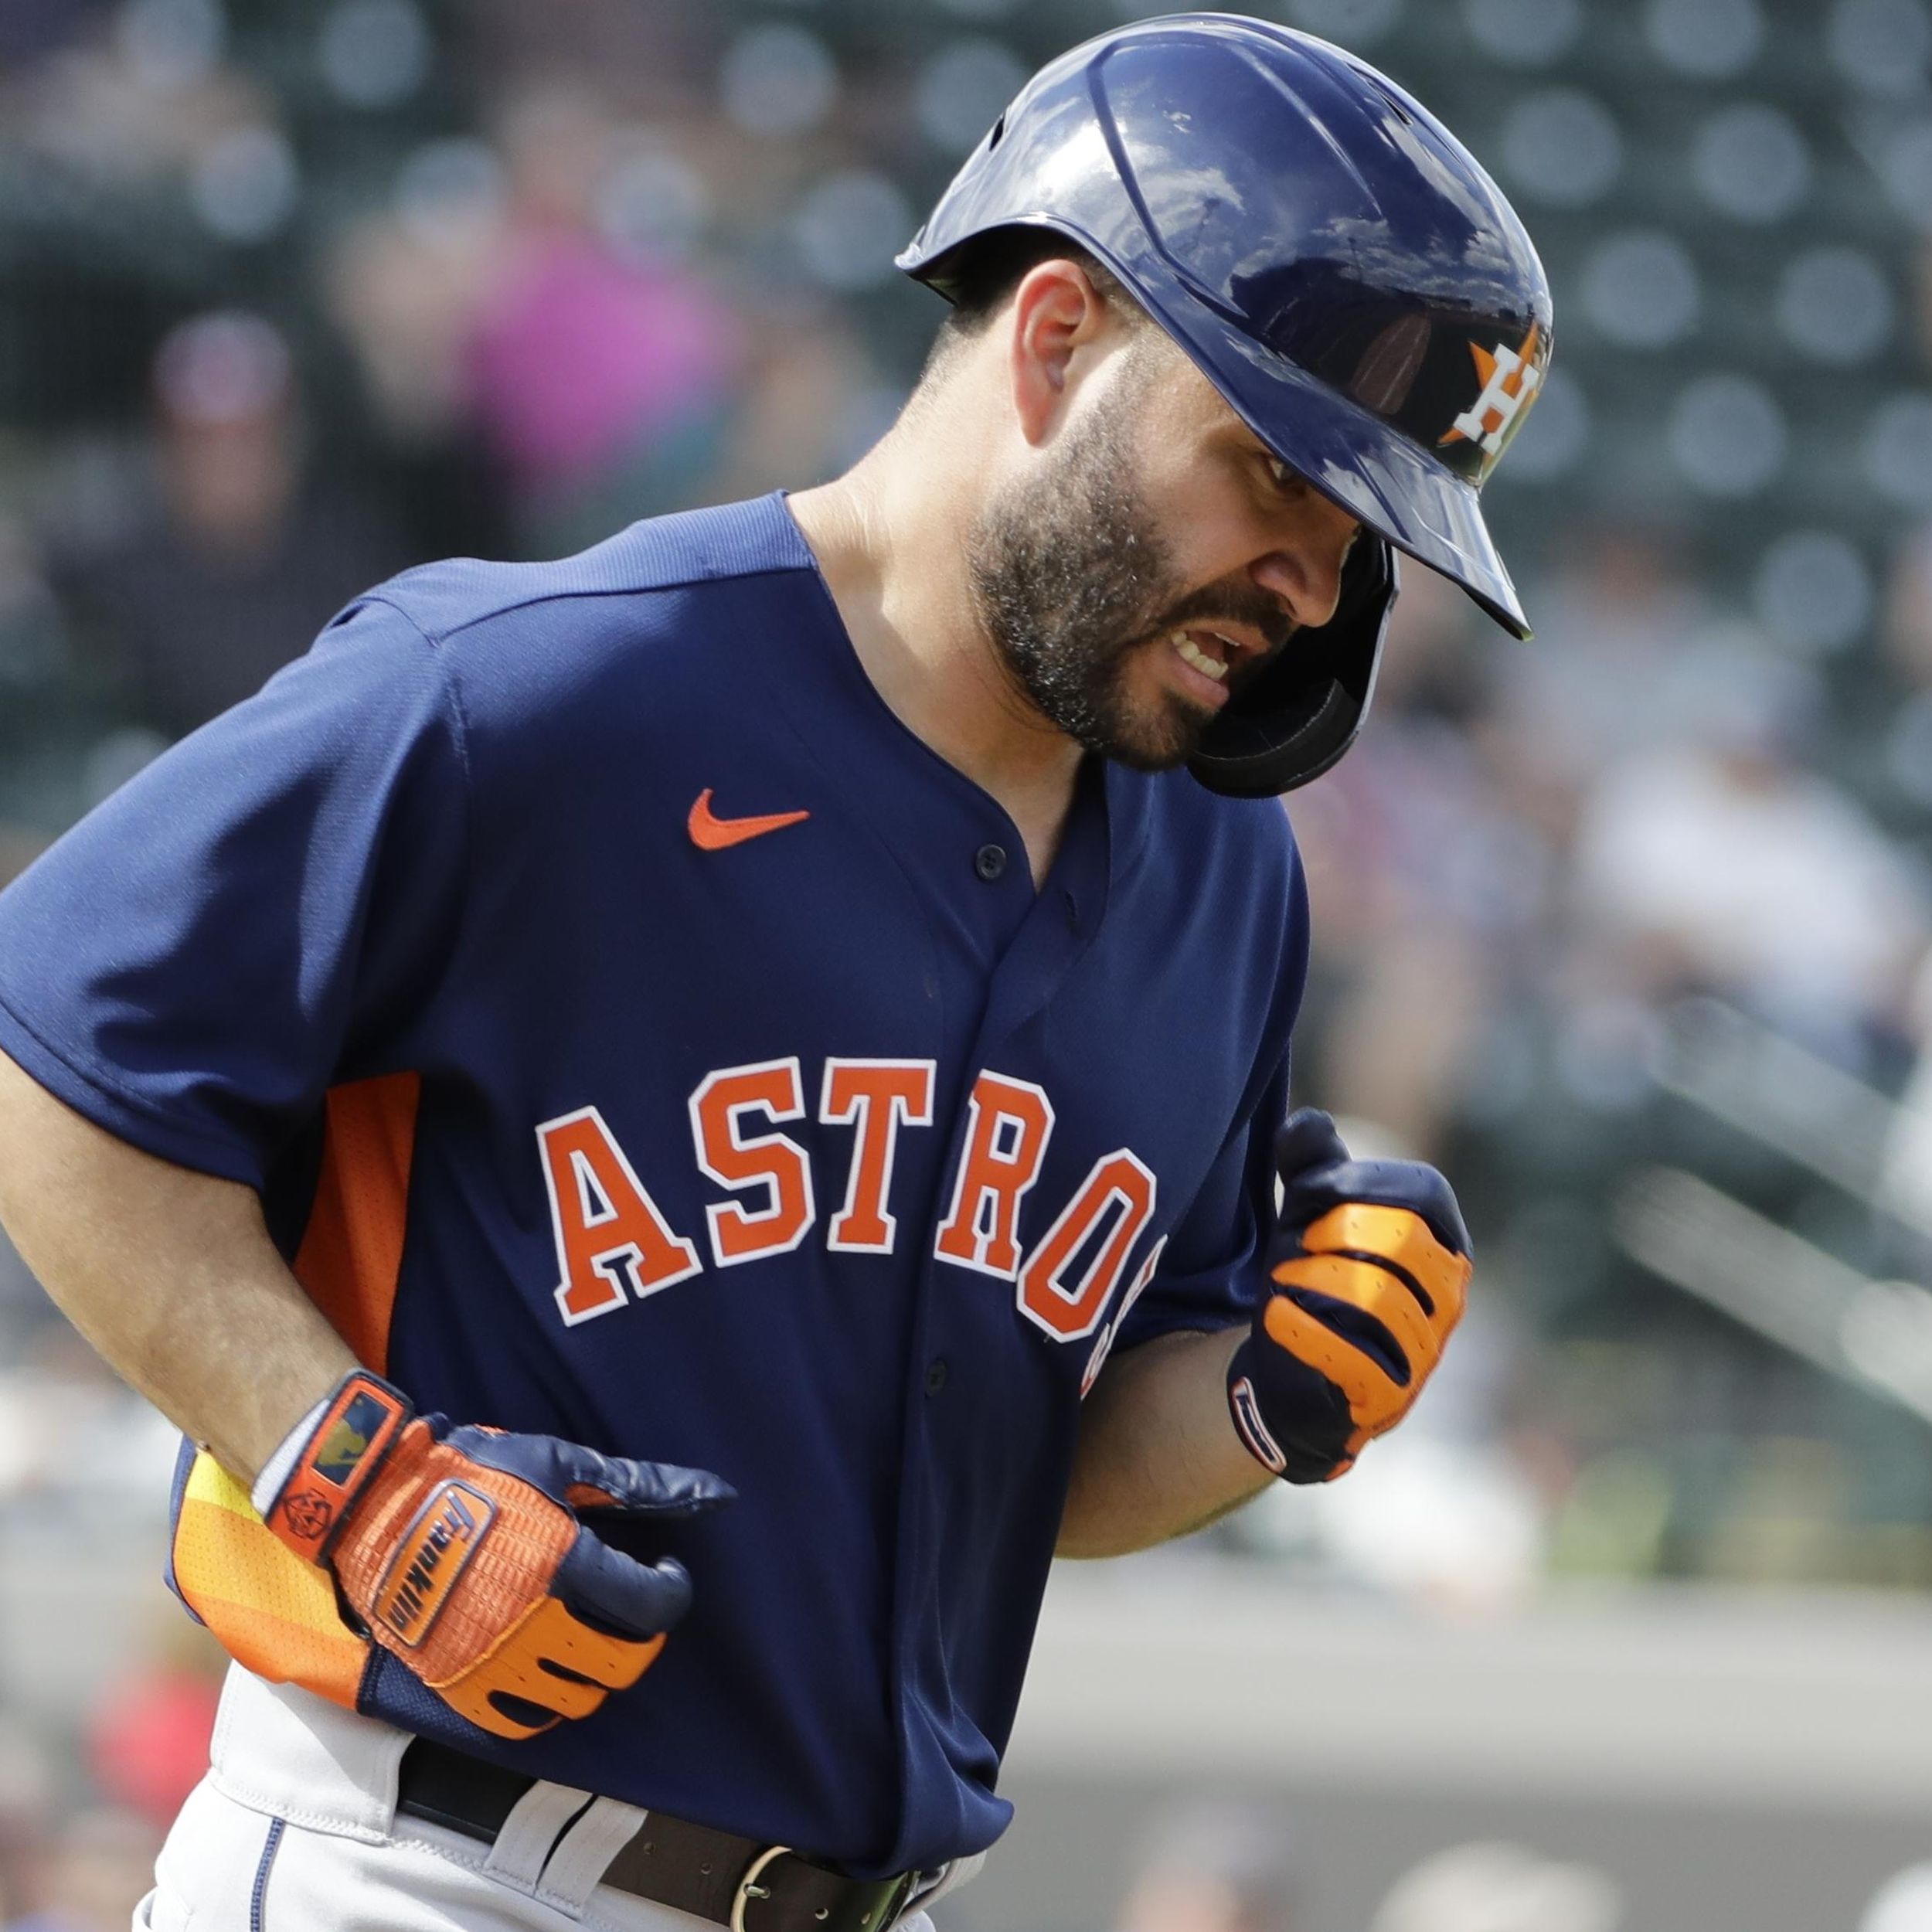 Astros' Jose Altuve nicked by pitch, stars booed in spring training game